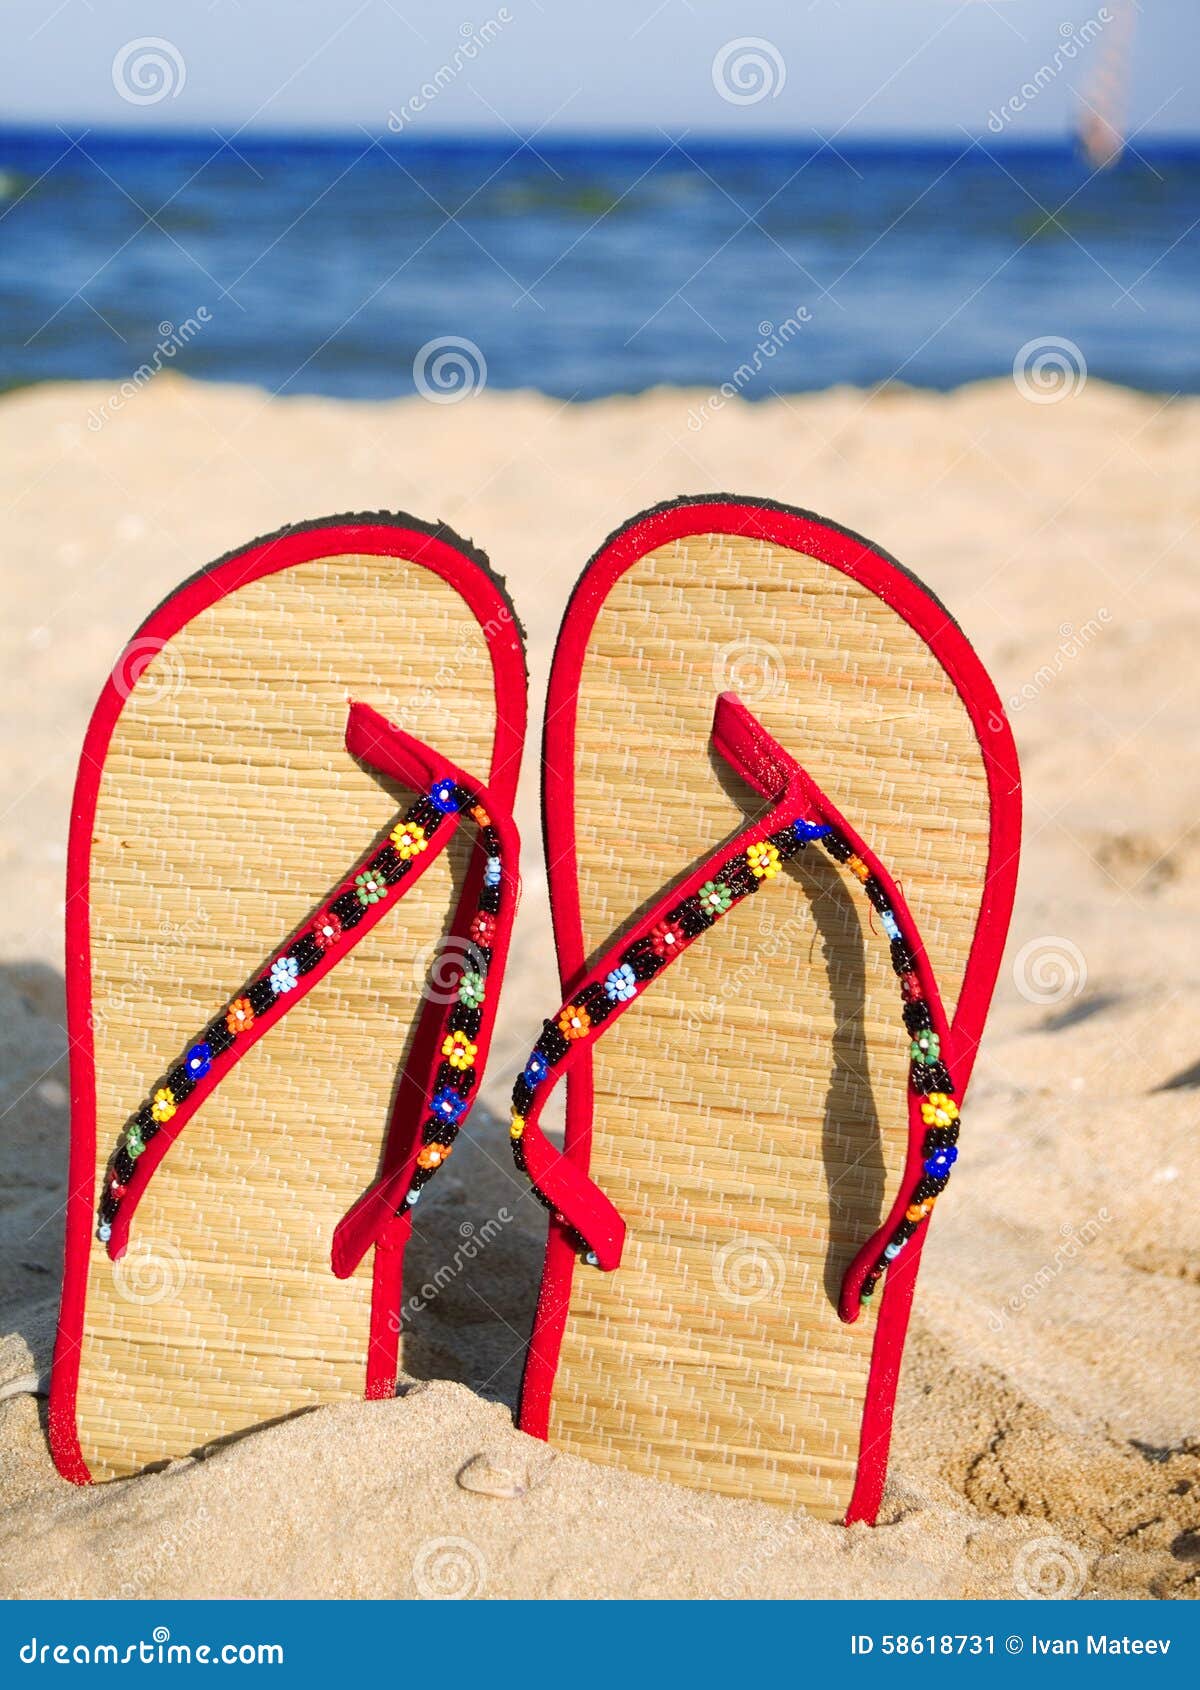 Sandals in the Sand stock image. Image of sand, travel - 58618731